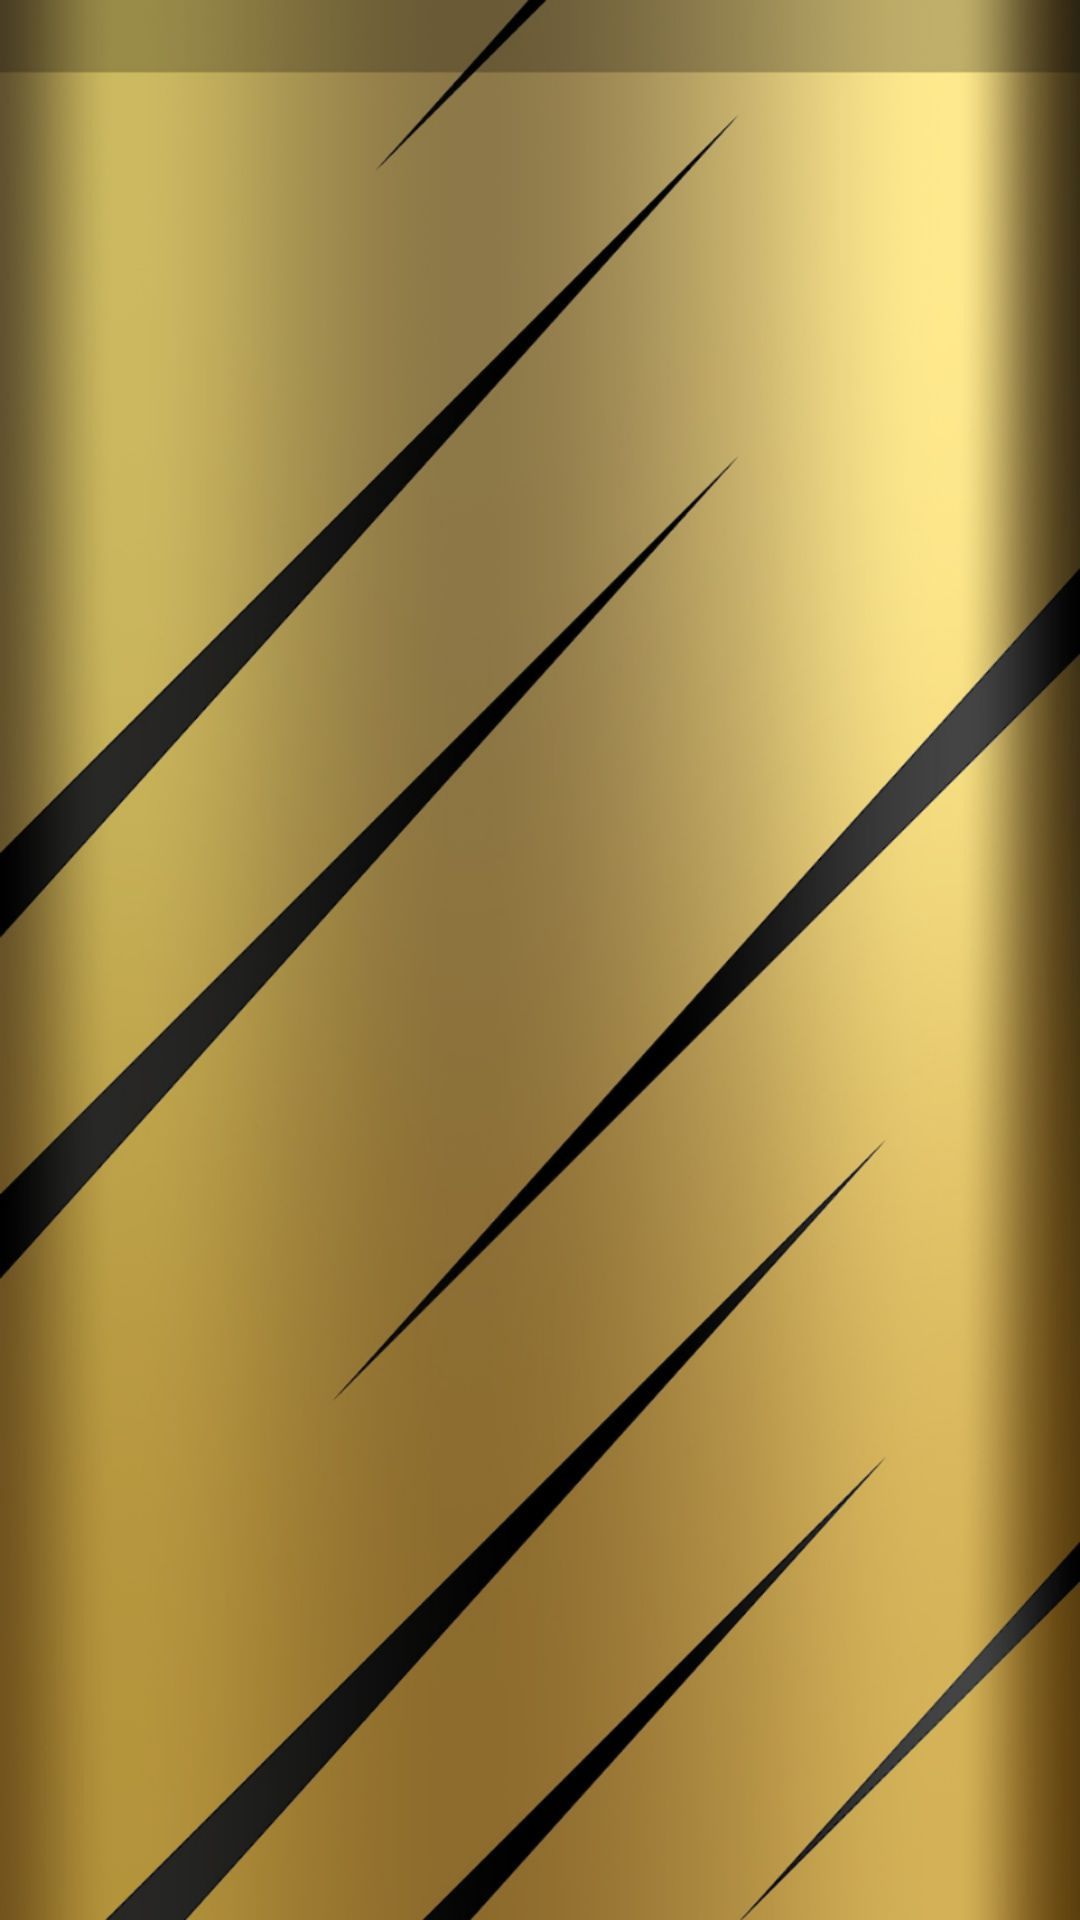 Abstract Wallpaper 11035954 Apple IPhone 7 Plus HD Wallpaper Available For Free Download. Gold Wallpaper, Yellow Wallpaper, Abstract Wallpaper